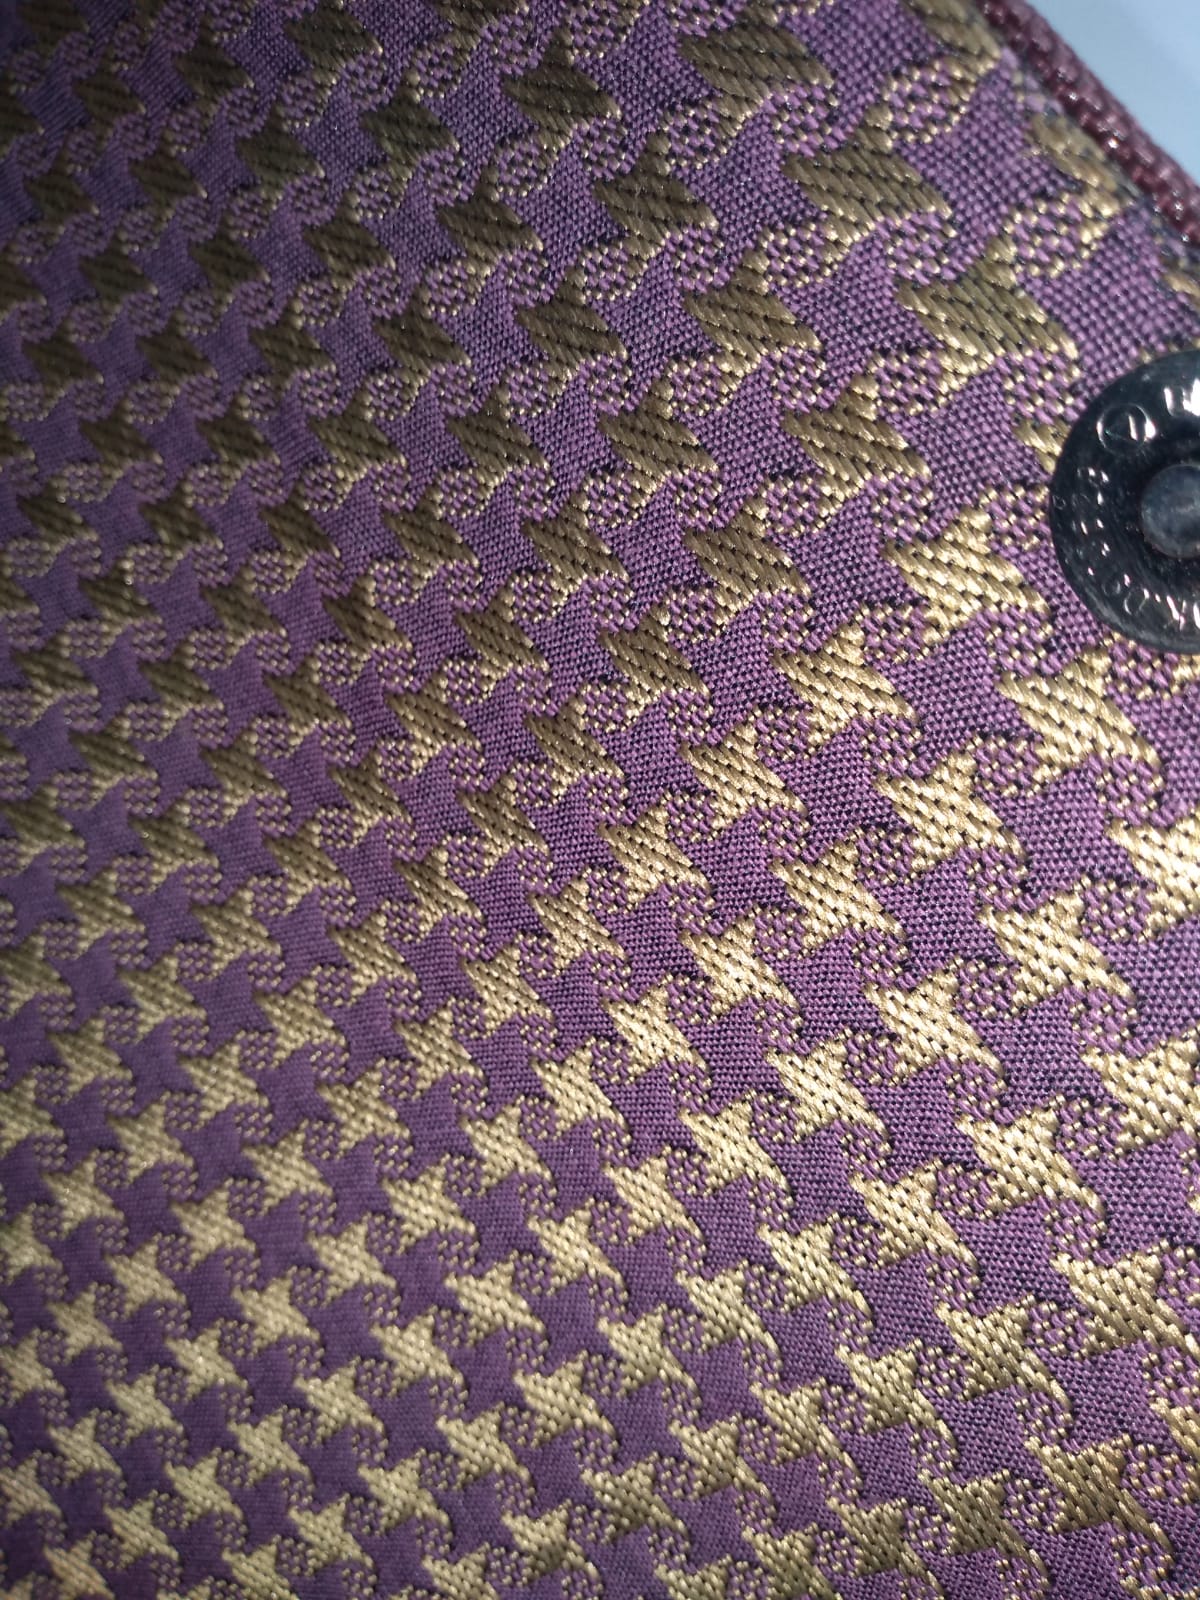 gold and purple hounds tooth lining of brown wood clutch